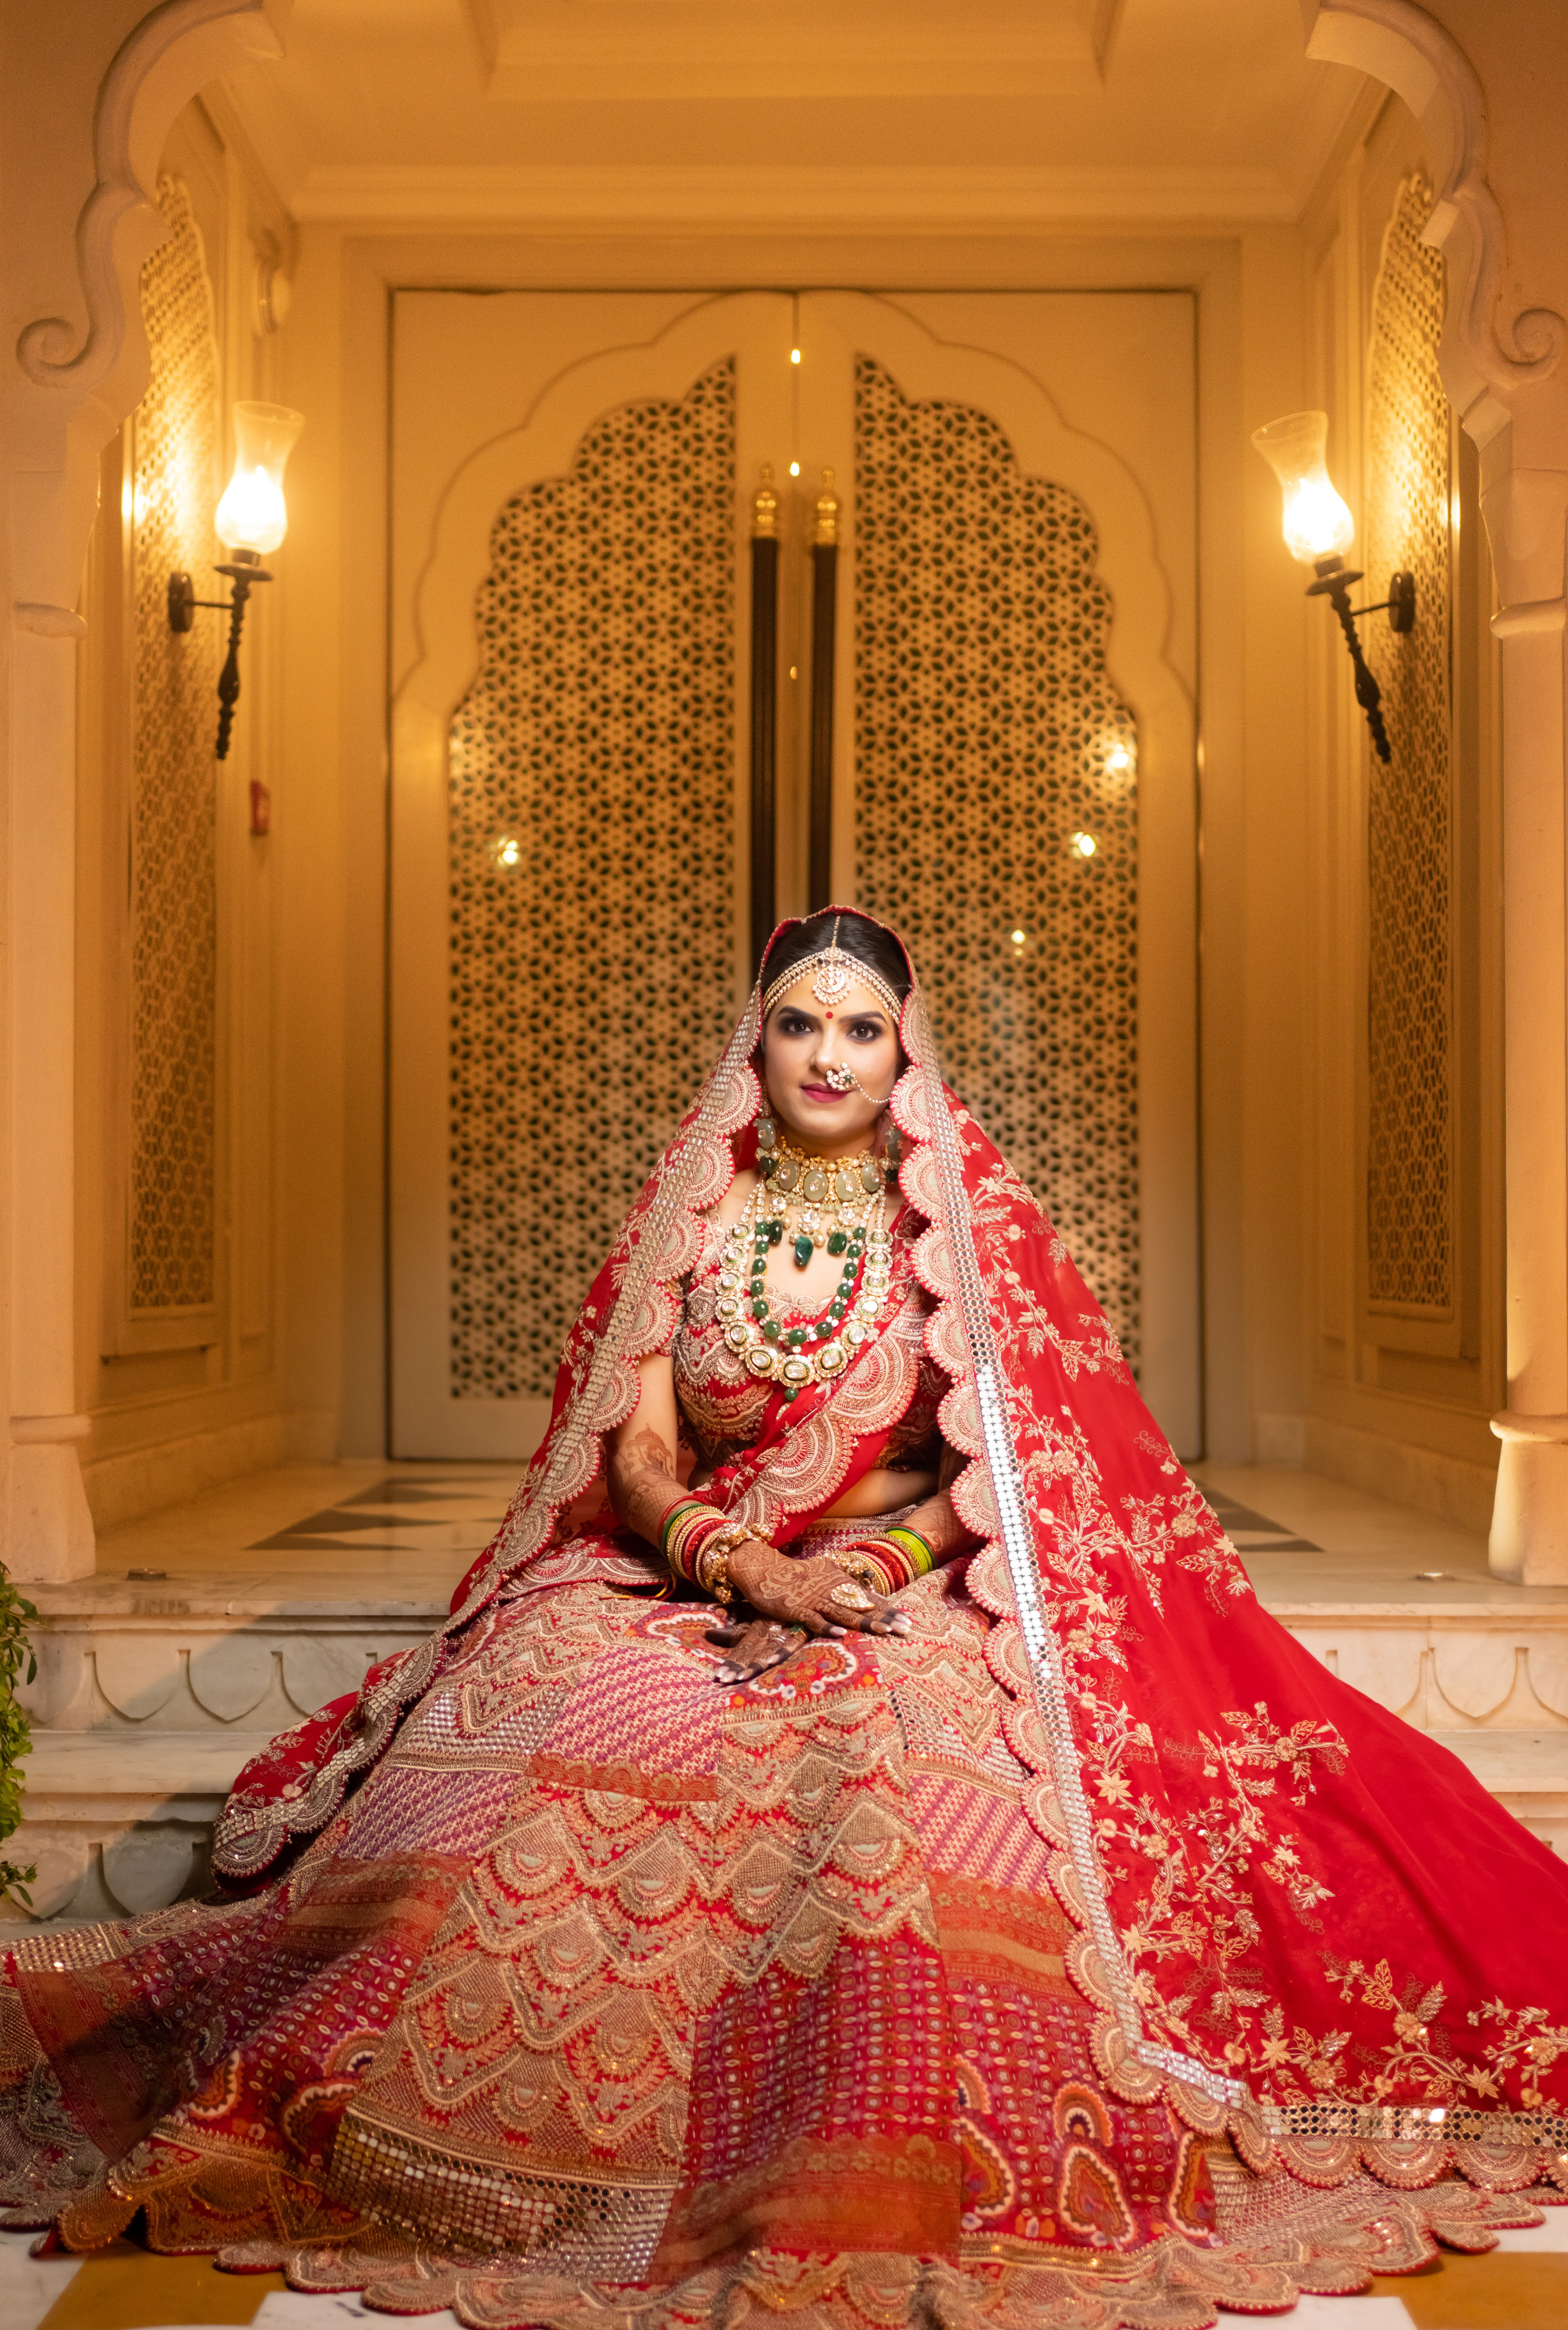 This Bride Slayed All Her Wedding Looks Decked Up In 121 Couture Outfits!